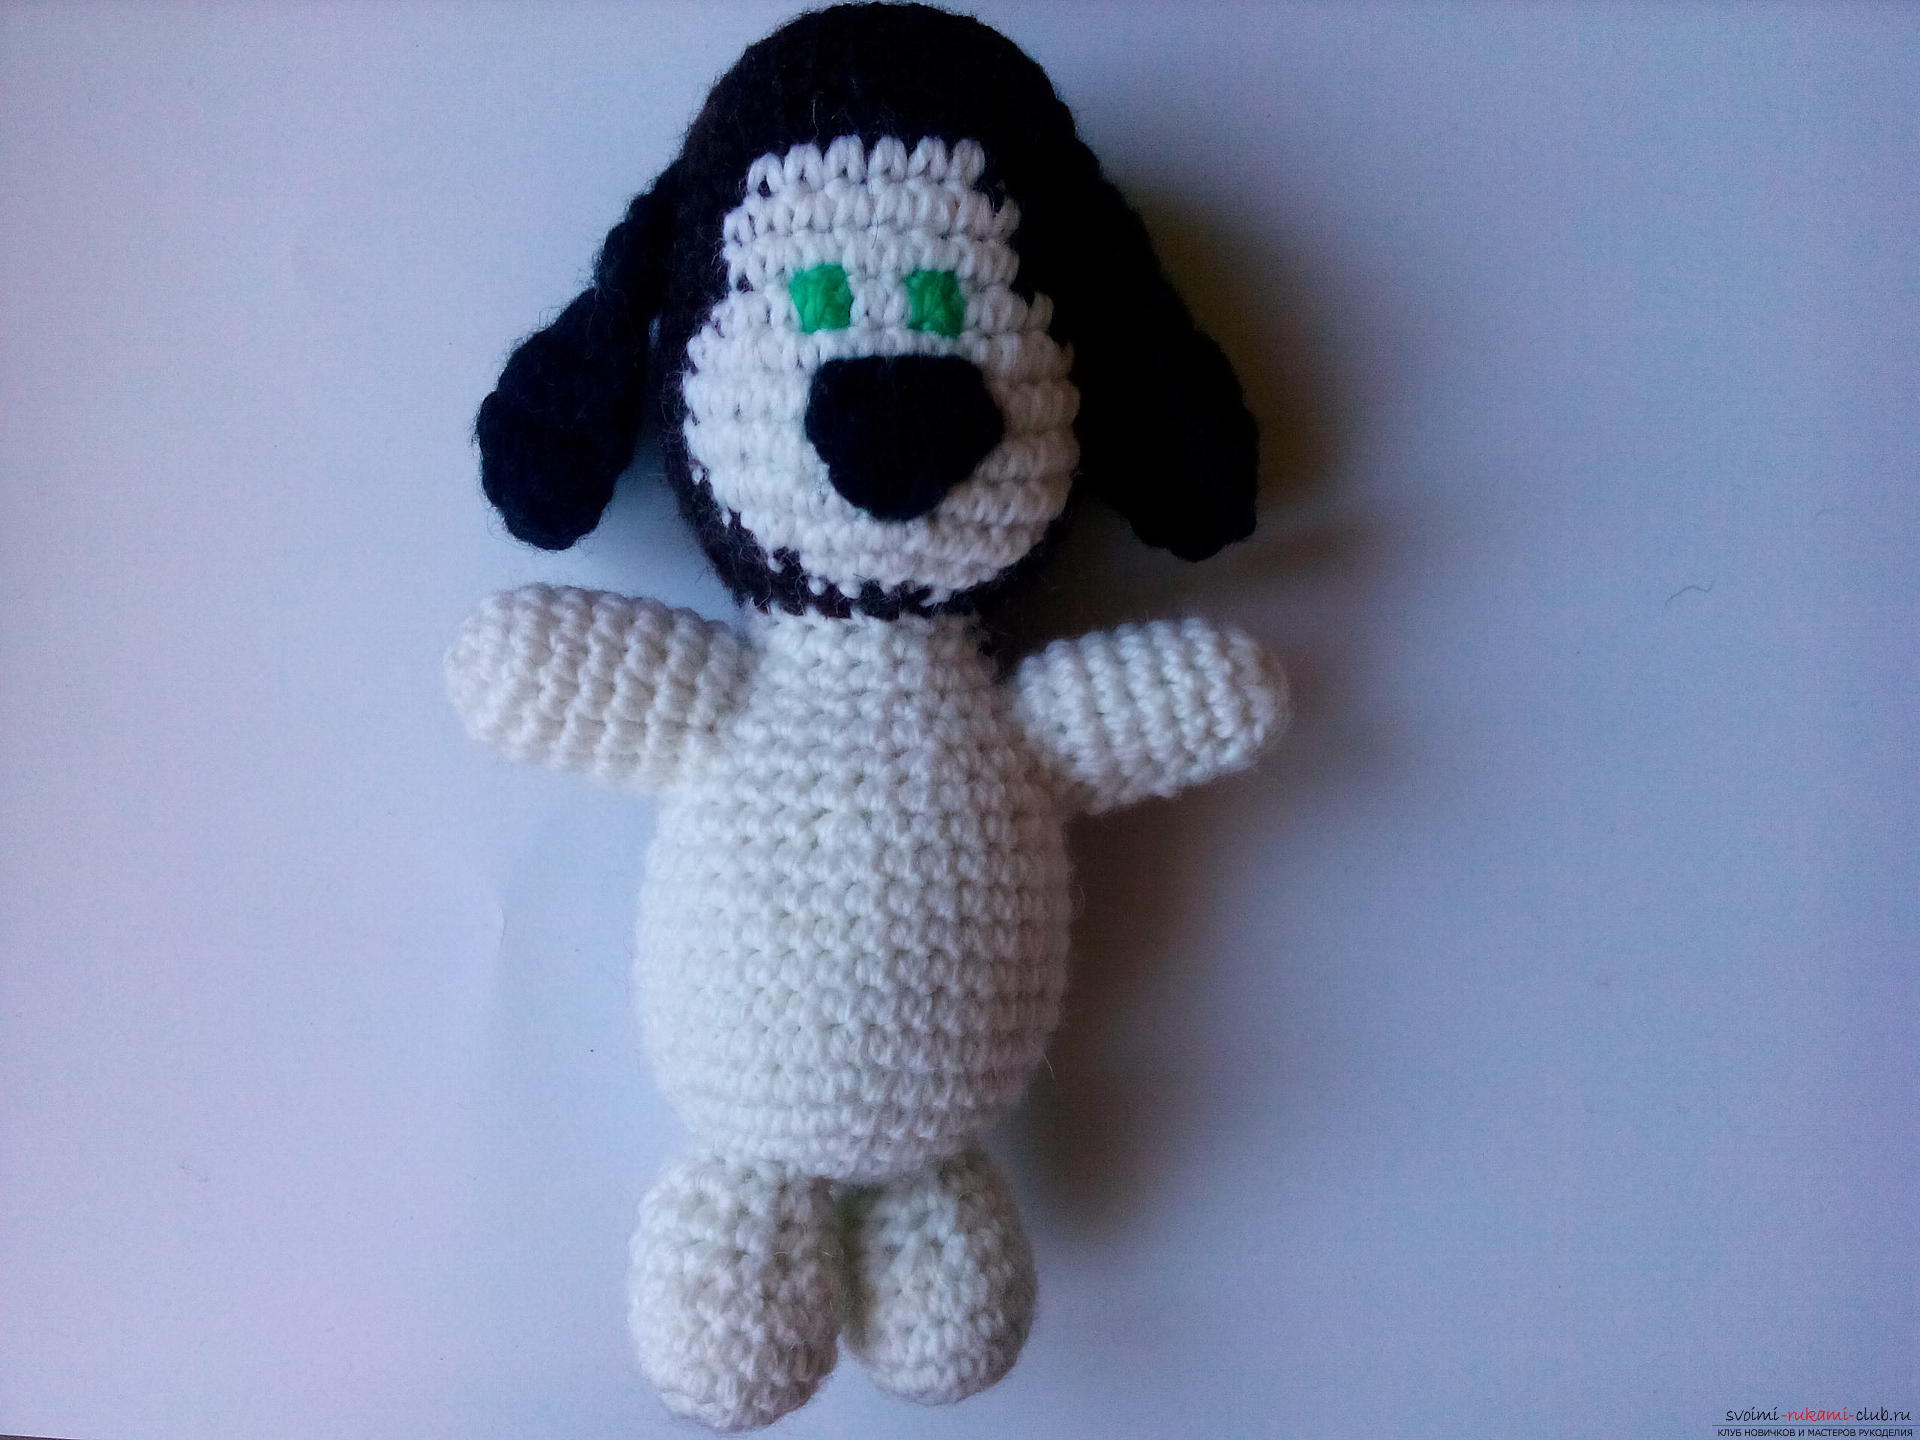 We create a knitted dog with a skirt with our own hands - an interesting master class. Photo number 12